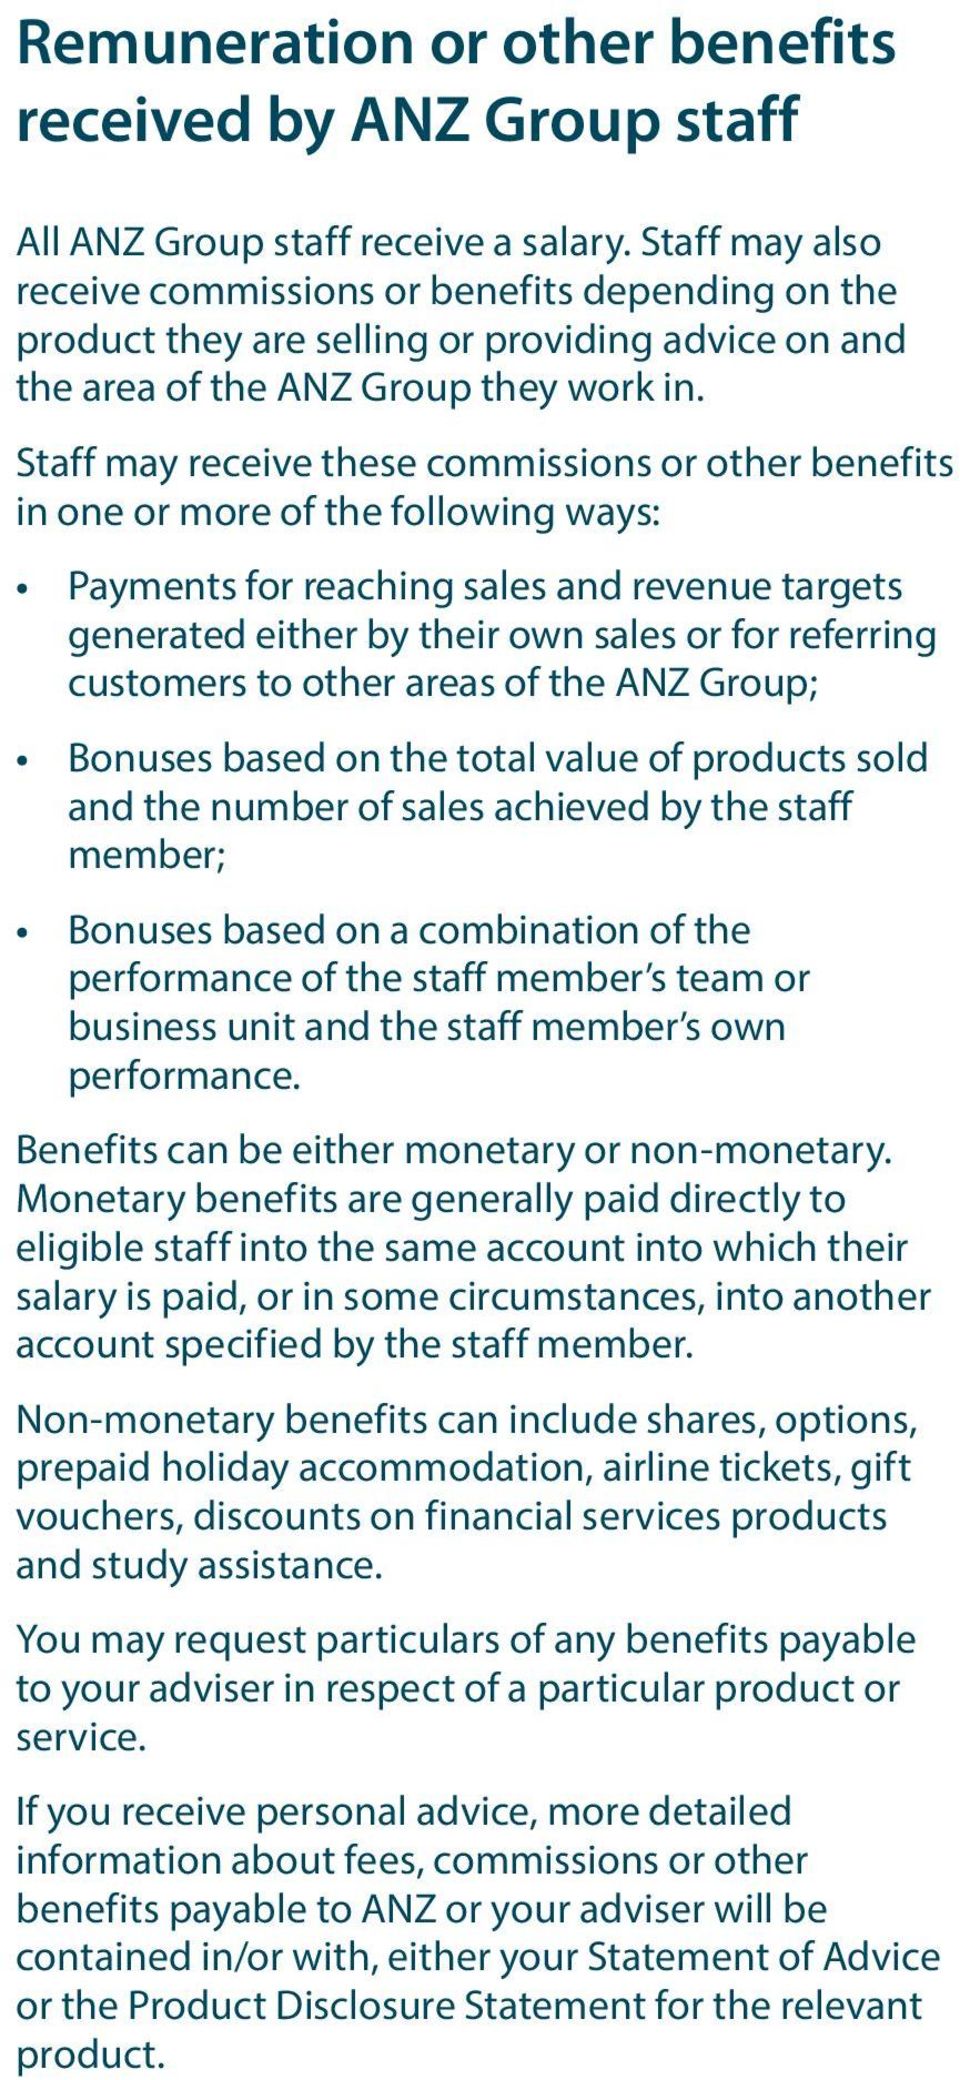 Staff may receive these commissions or other benefits in one or more of the following ways: Payments for reaching sales and revenue targets generated either by their own sales or for referring